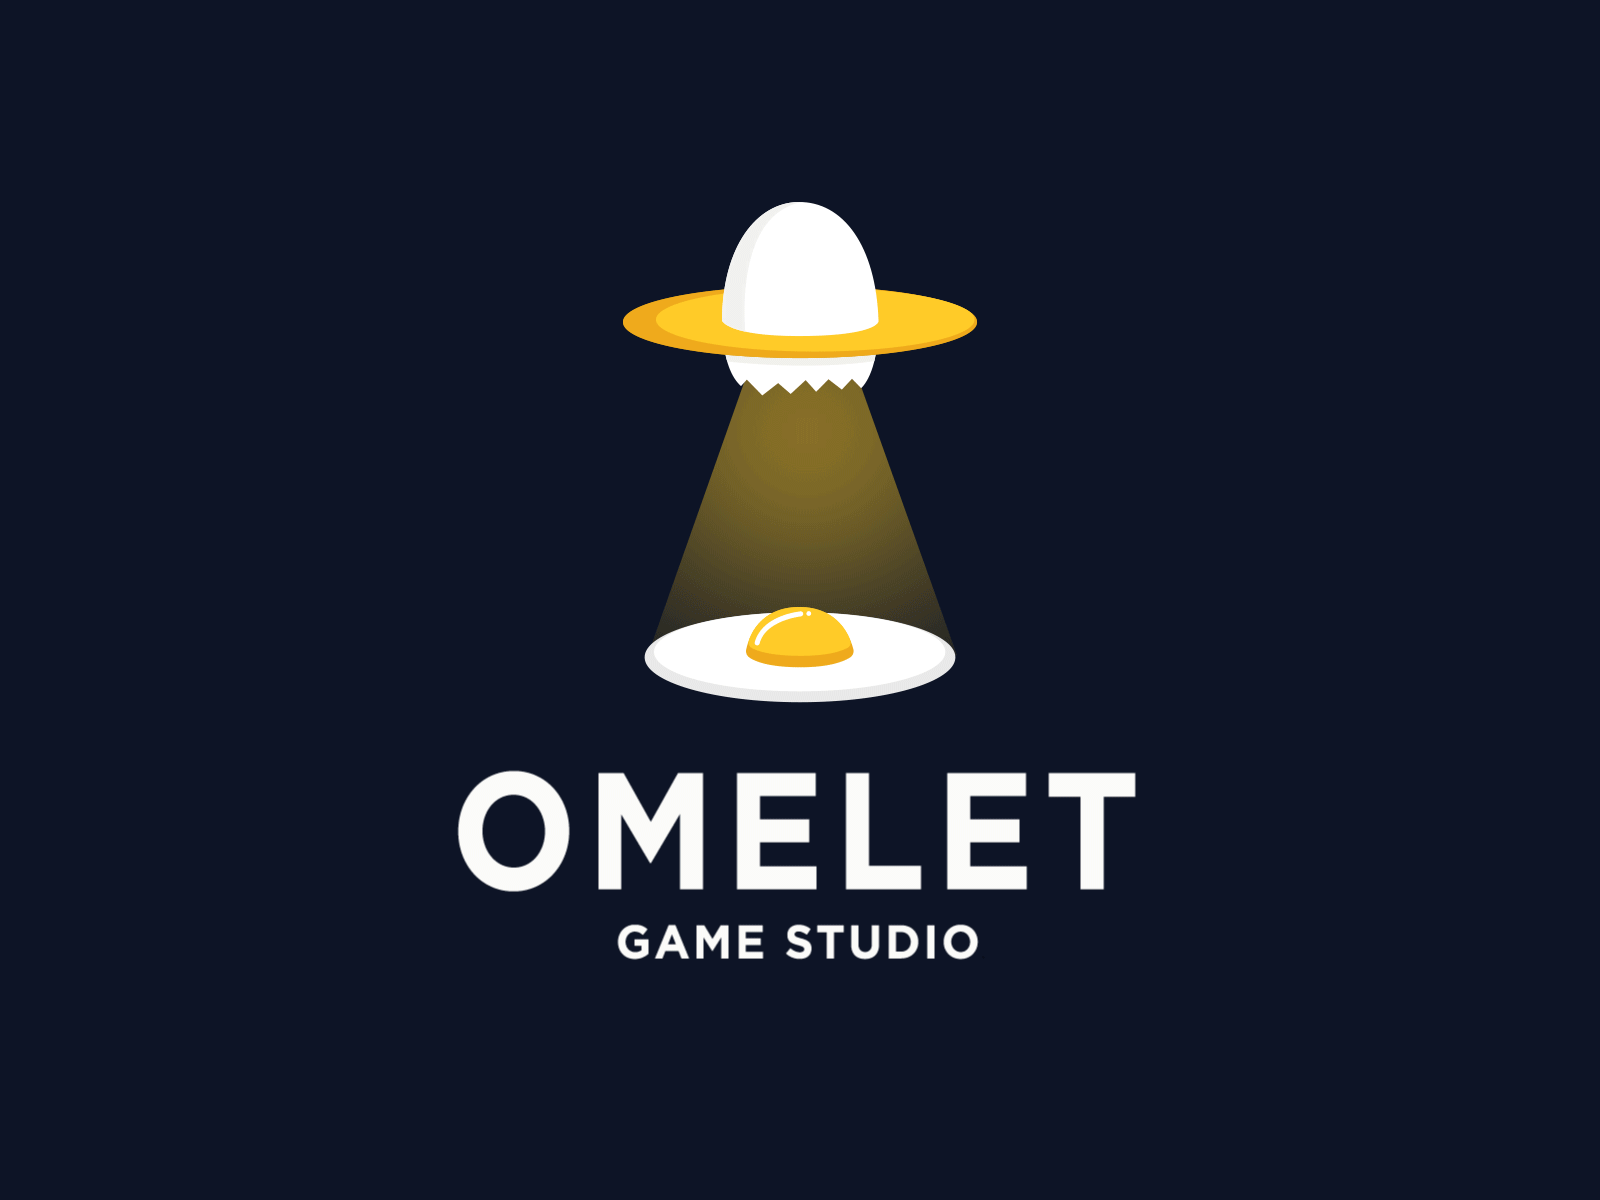 Logo Animation of Omelet Game Studio by R A H A J O E on Dribbble